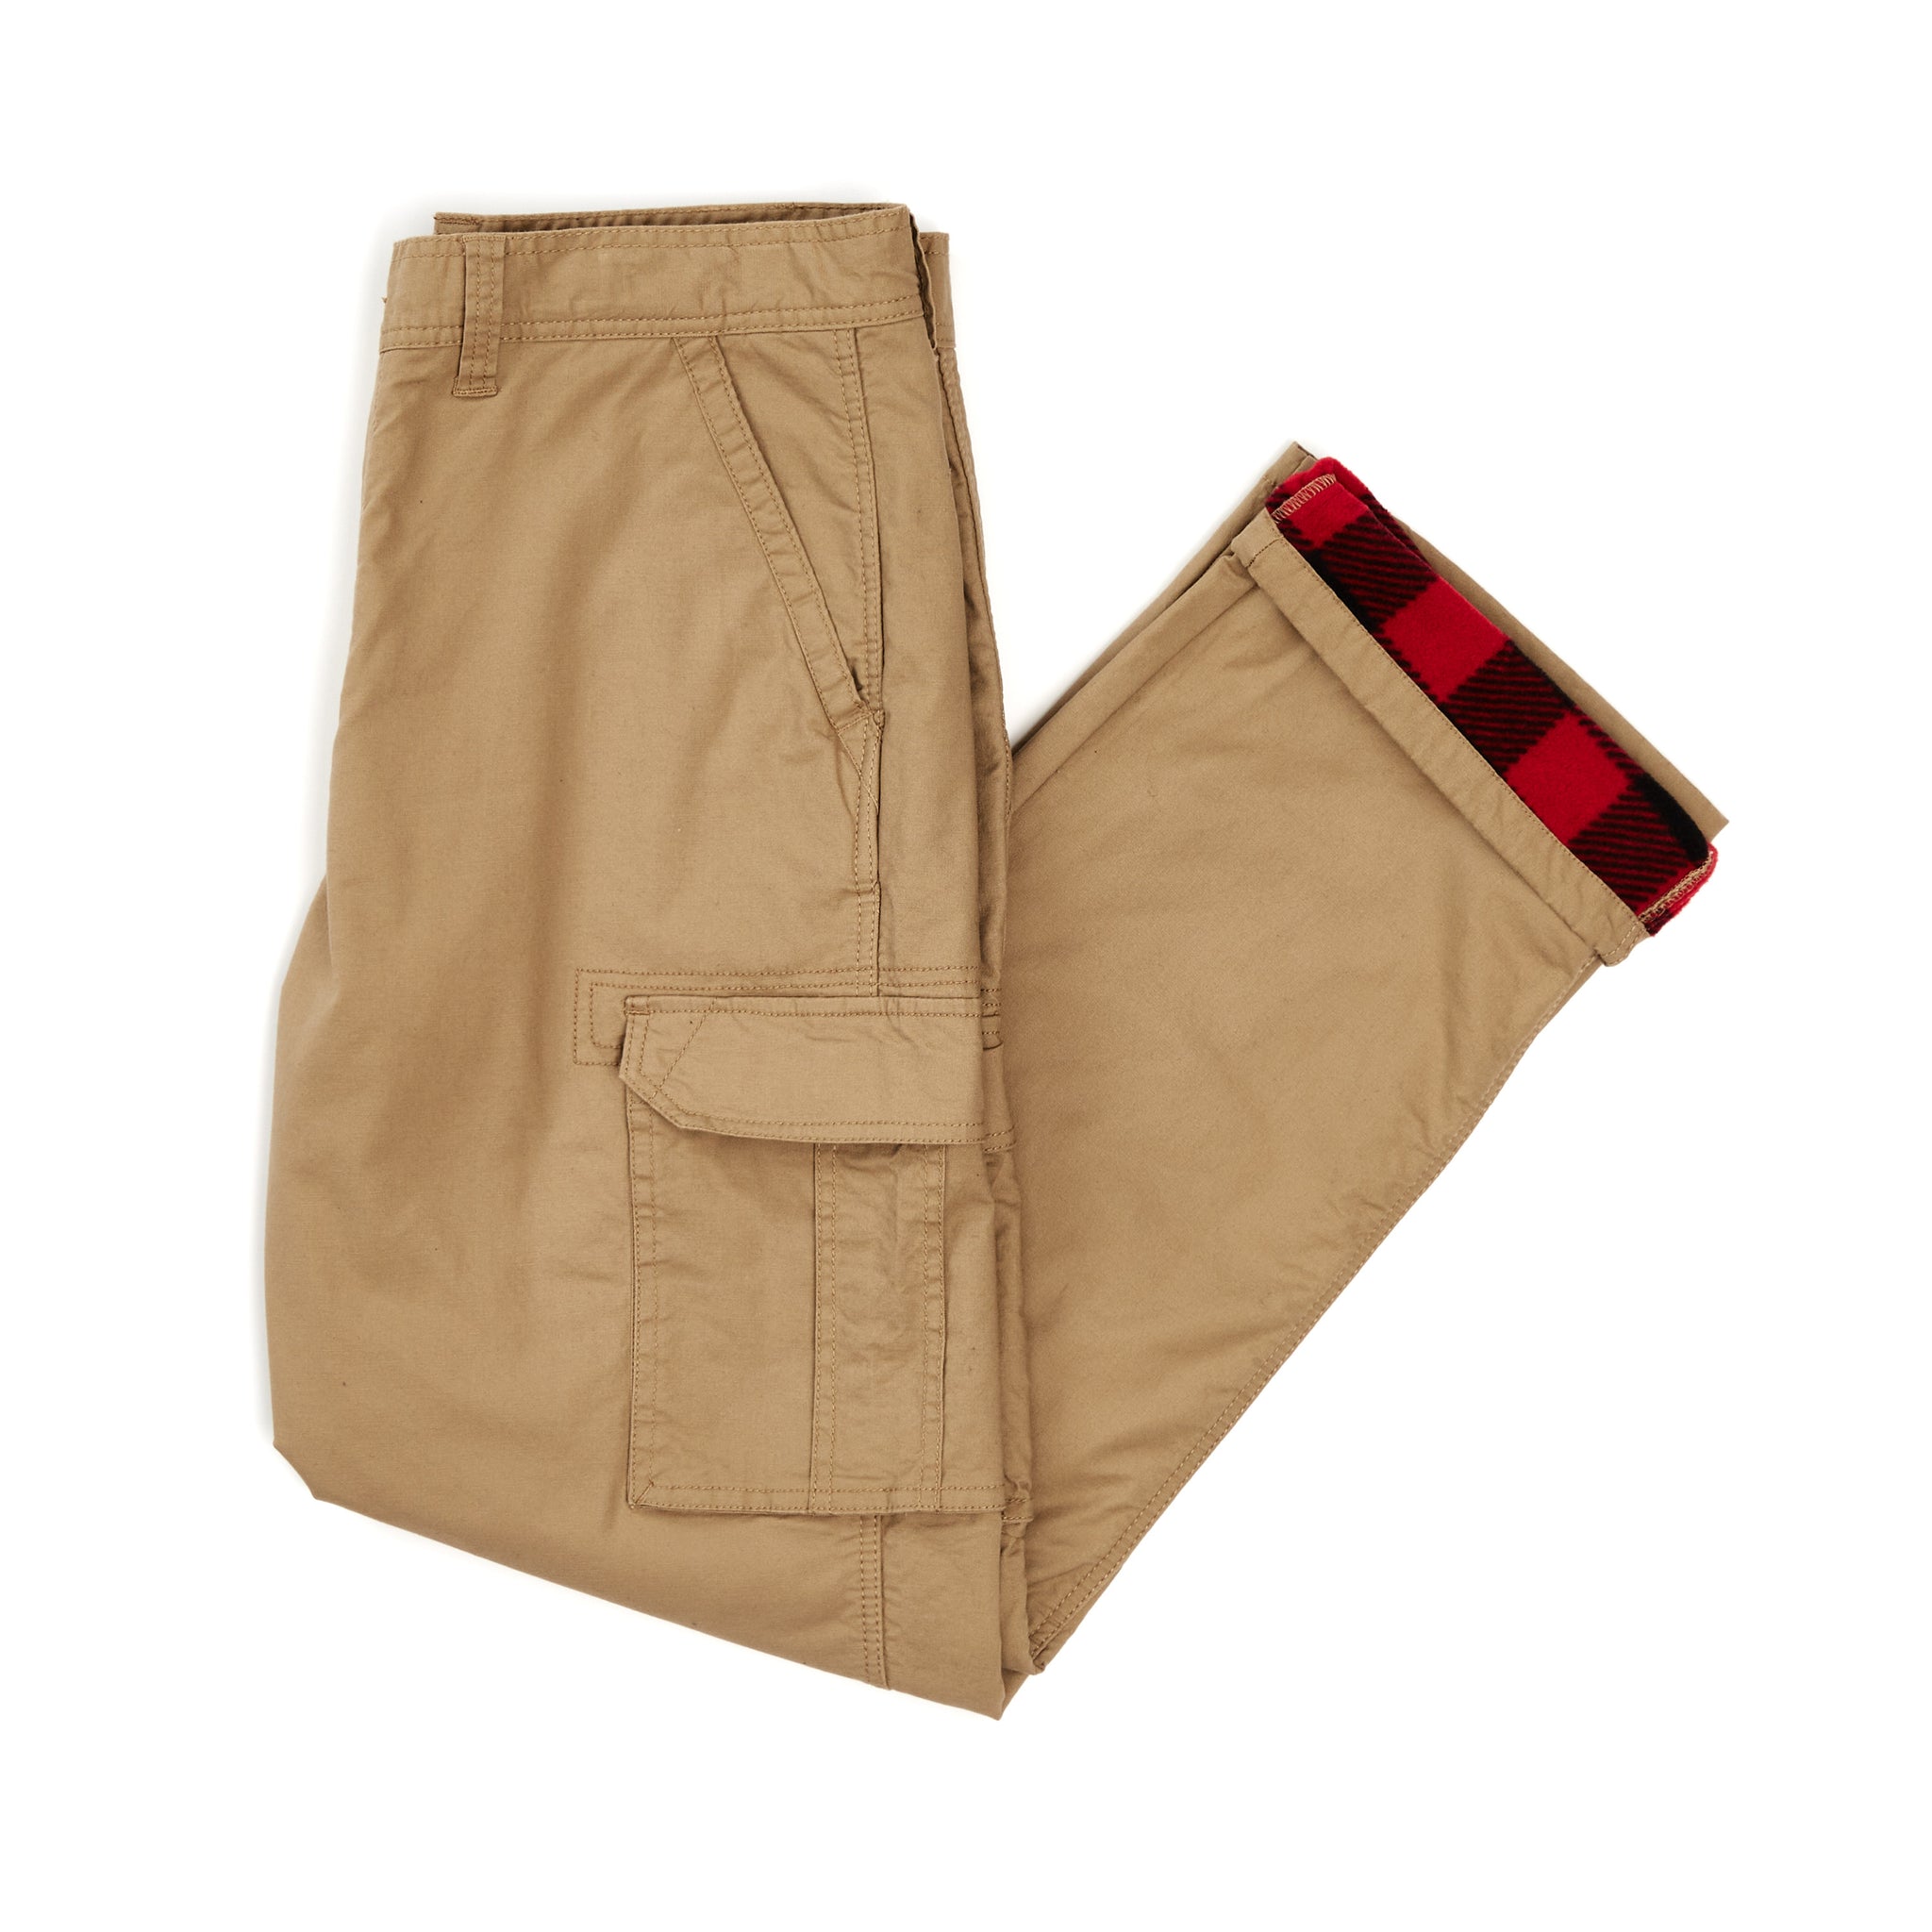 PRINTED FLEECE-LINED CANVAS CARGO PANT